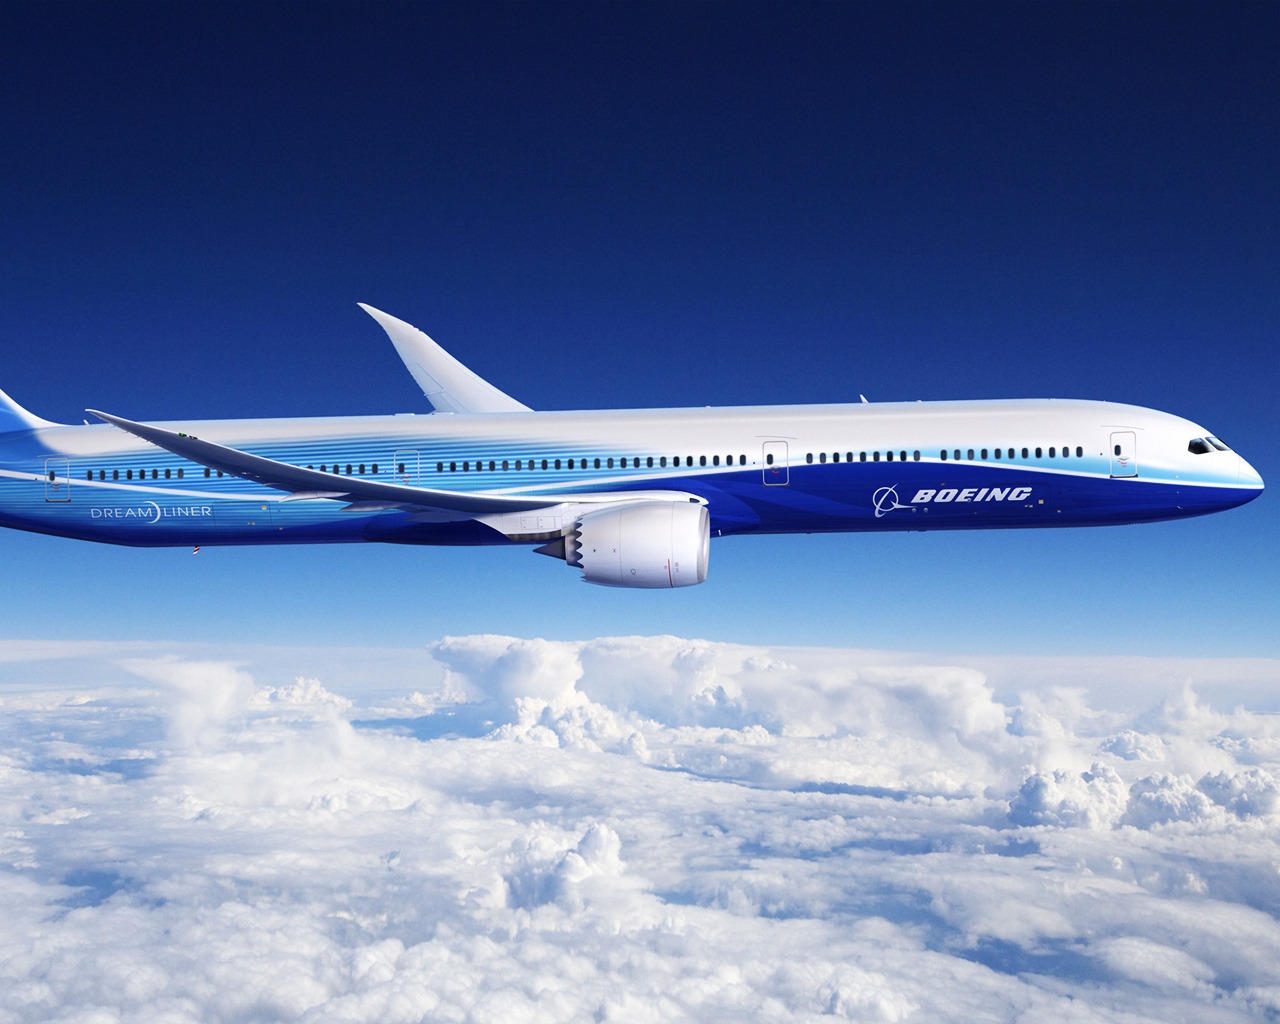 Boeing 787 for 1280 x 1024 resolution